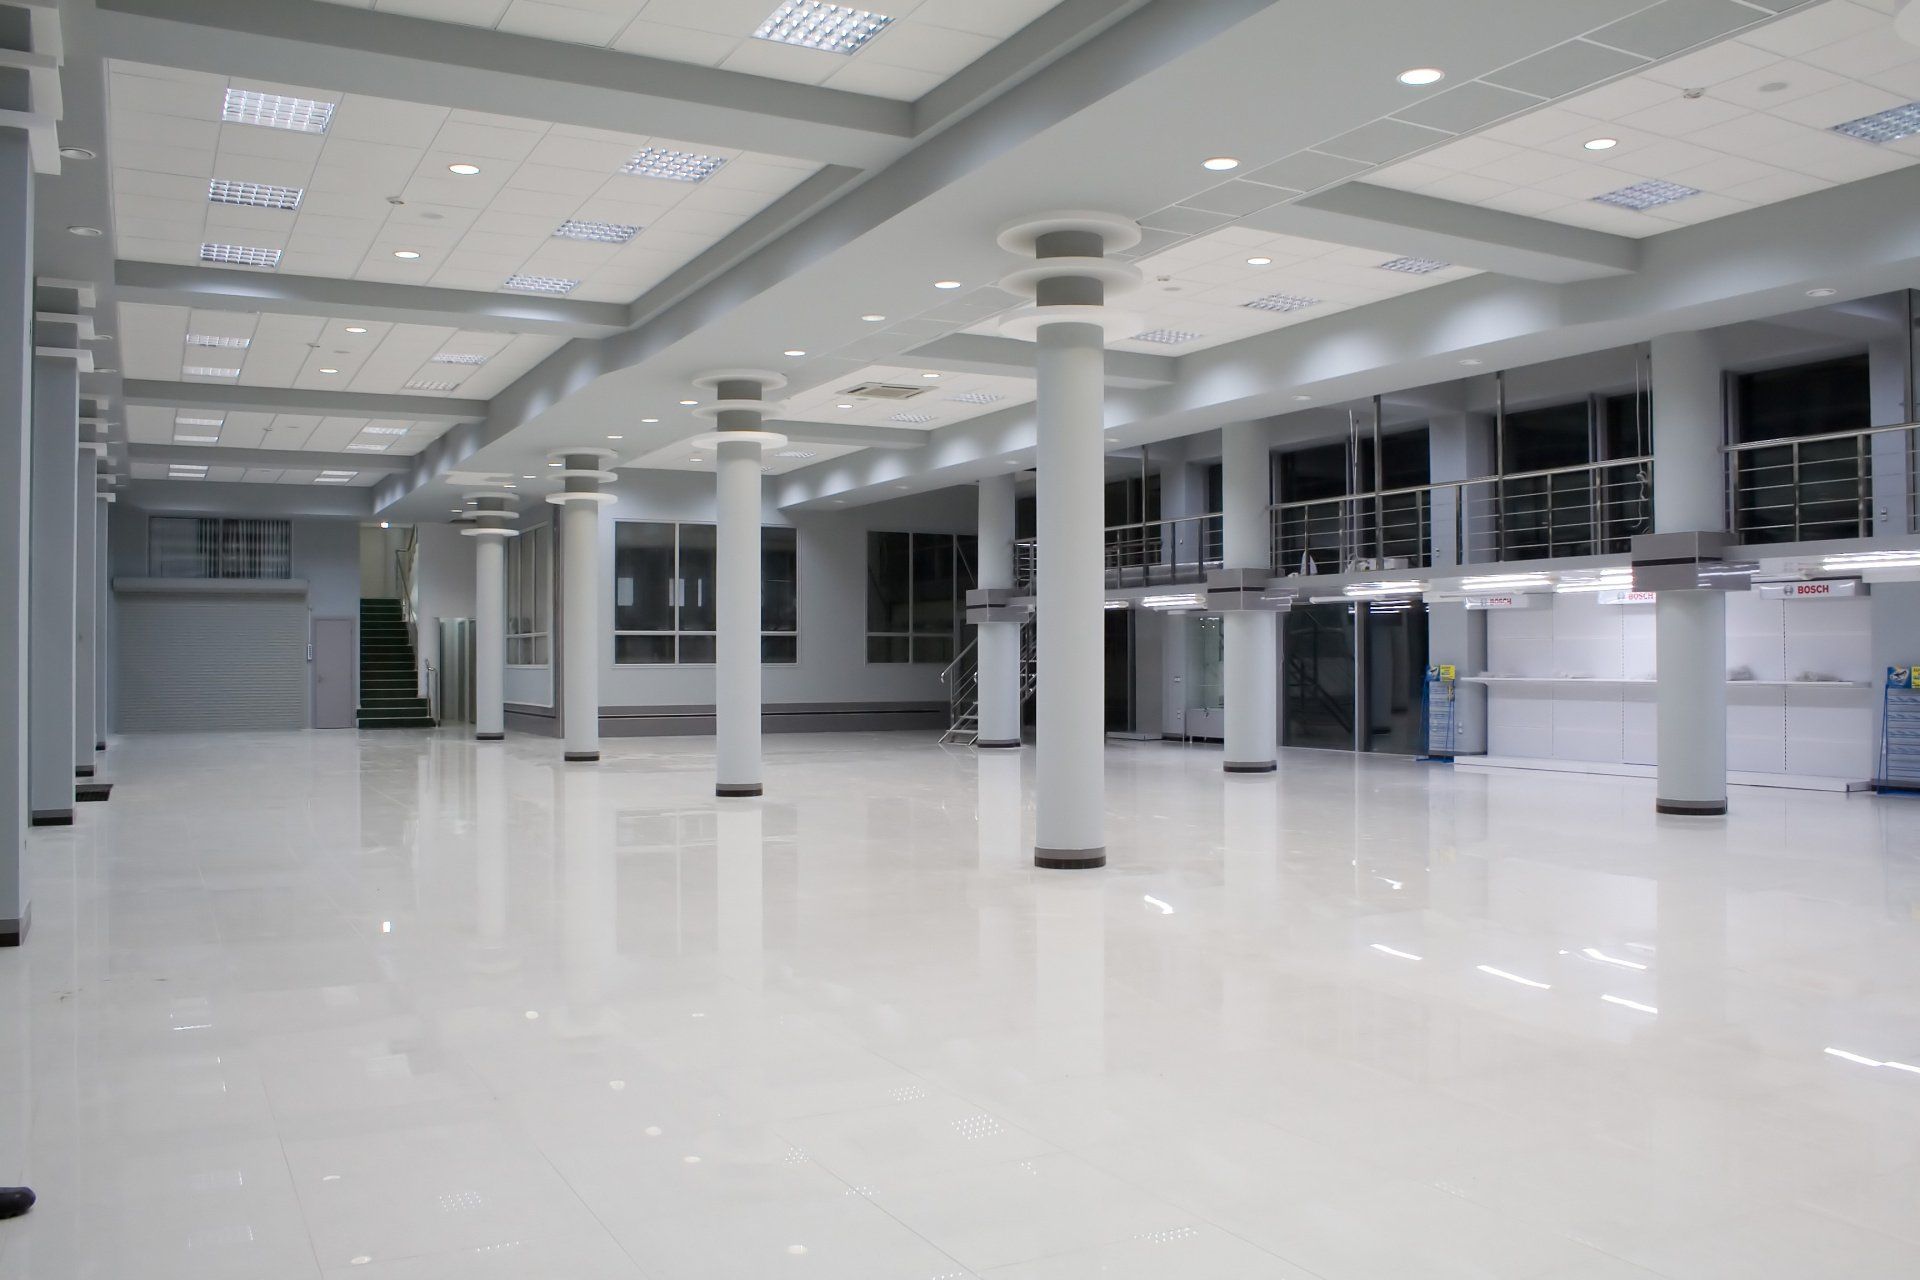 A large empty room with columns and a lot of windows.